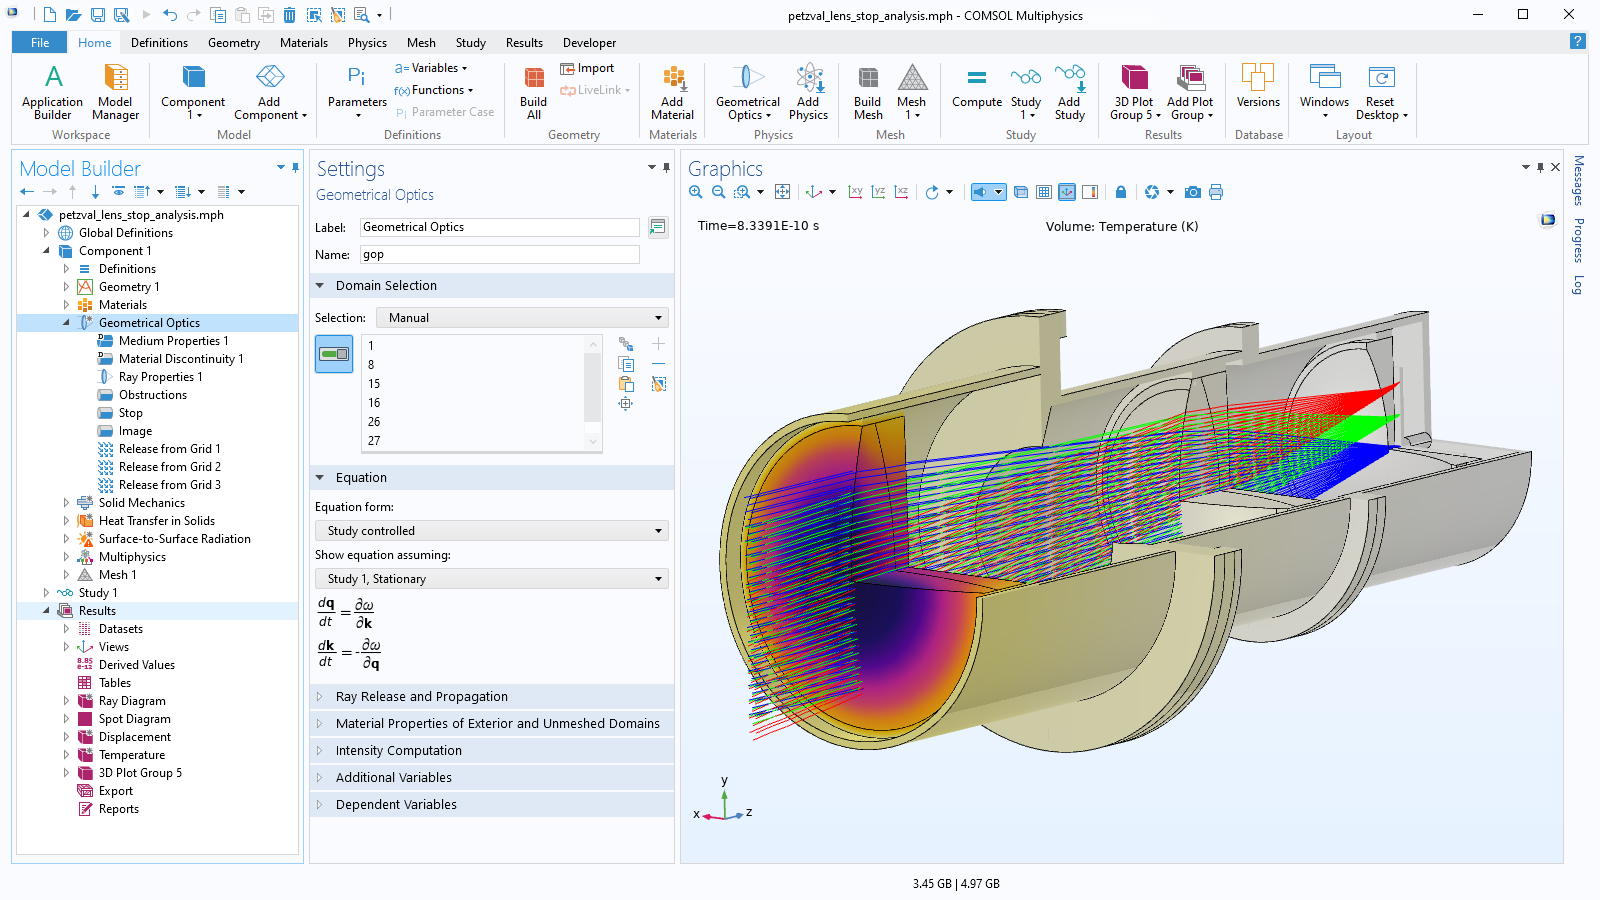 The COMSOL Multiphysics UI showing the Model Builder with the Geometrical Optics node highlighted, the corresponding Settings window, and a petzval lens model in the Graphics window.